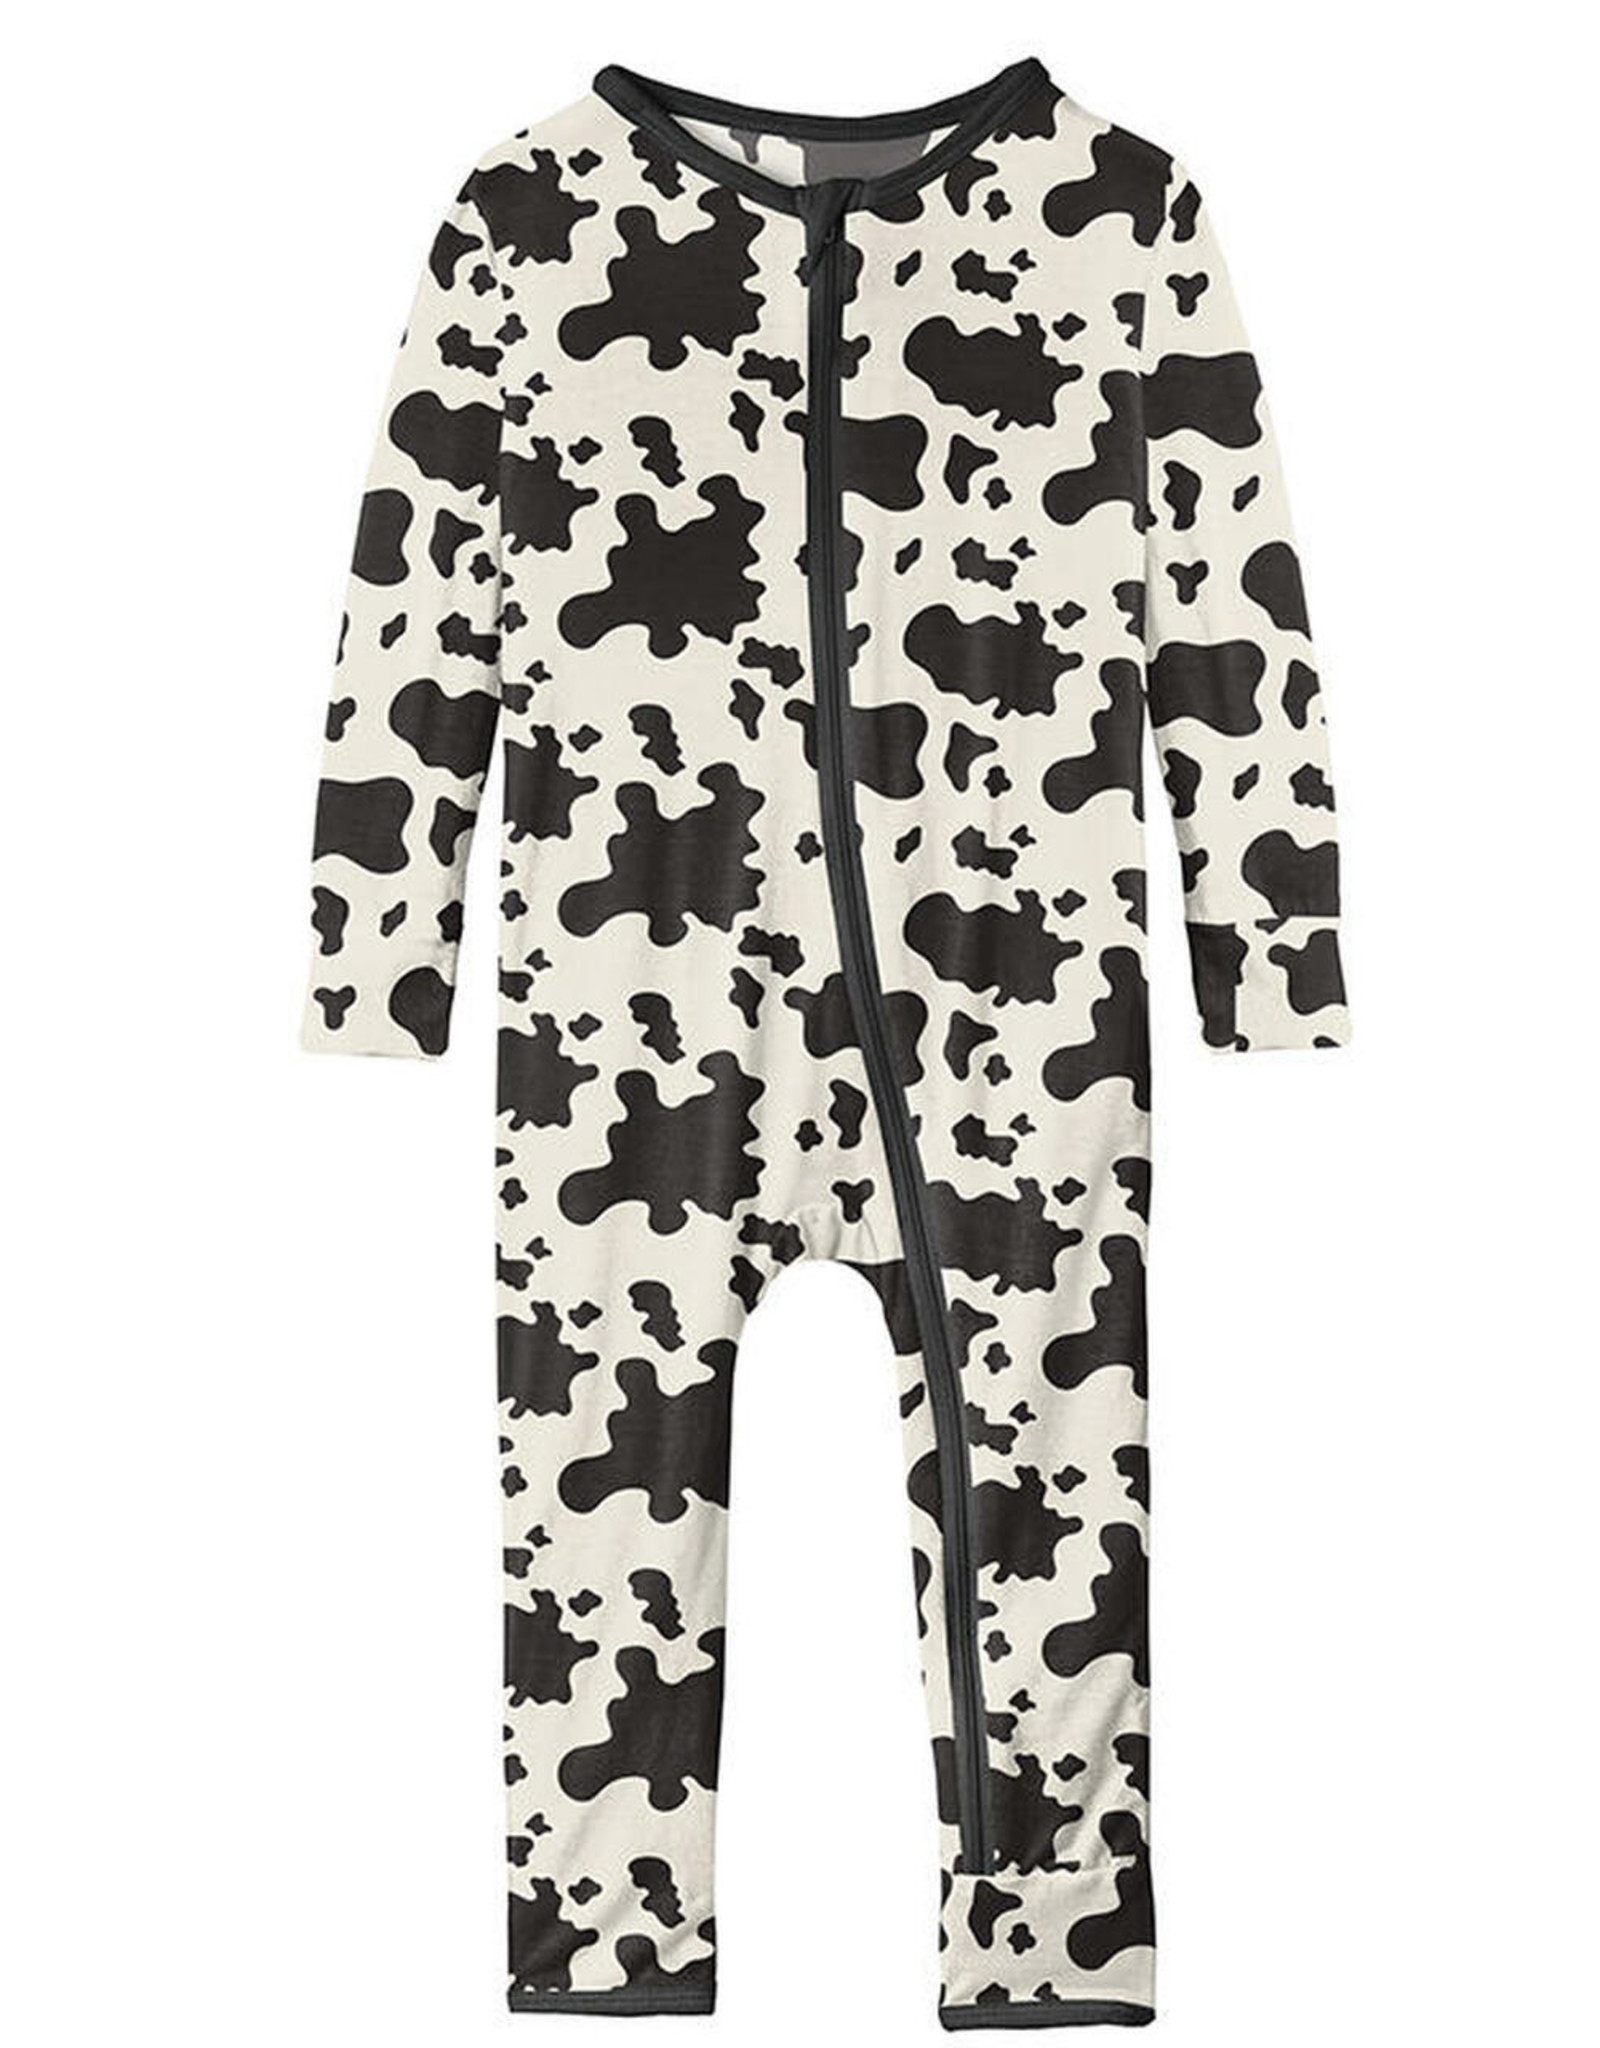 KicKee Pants Print Coverall with Zipper